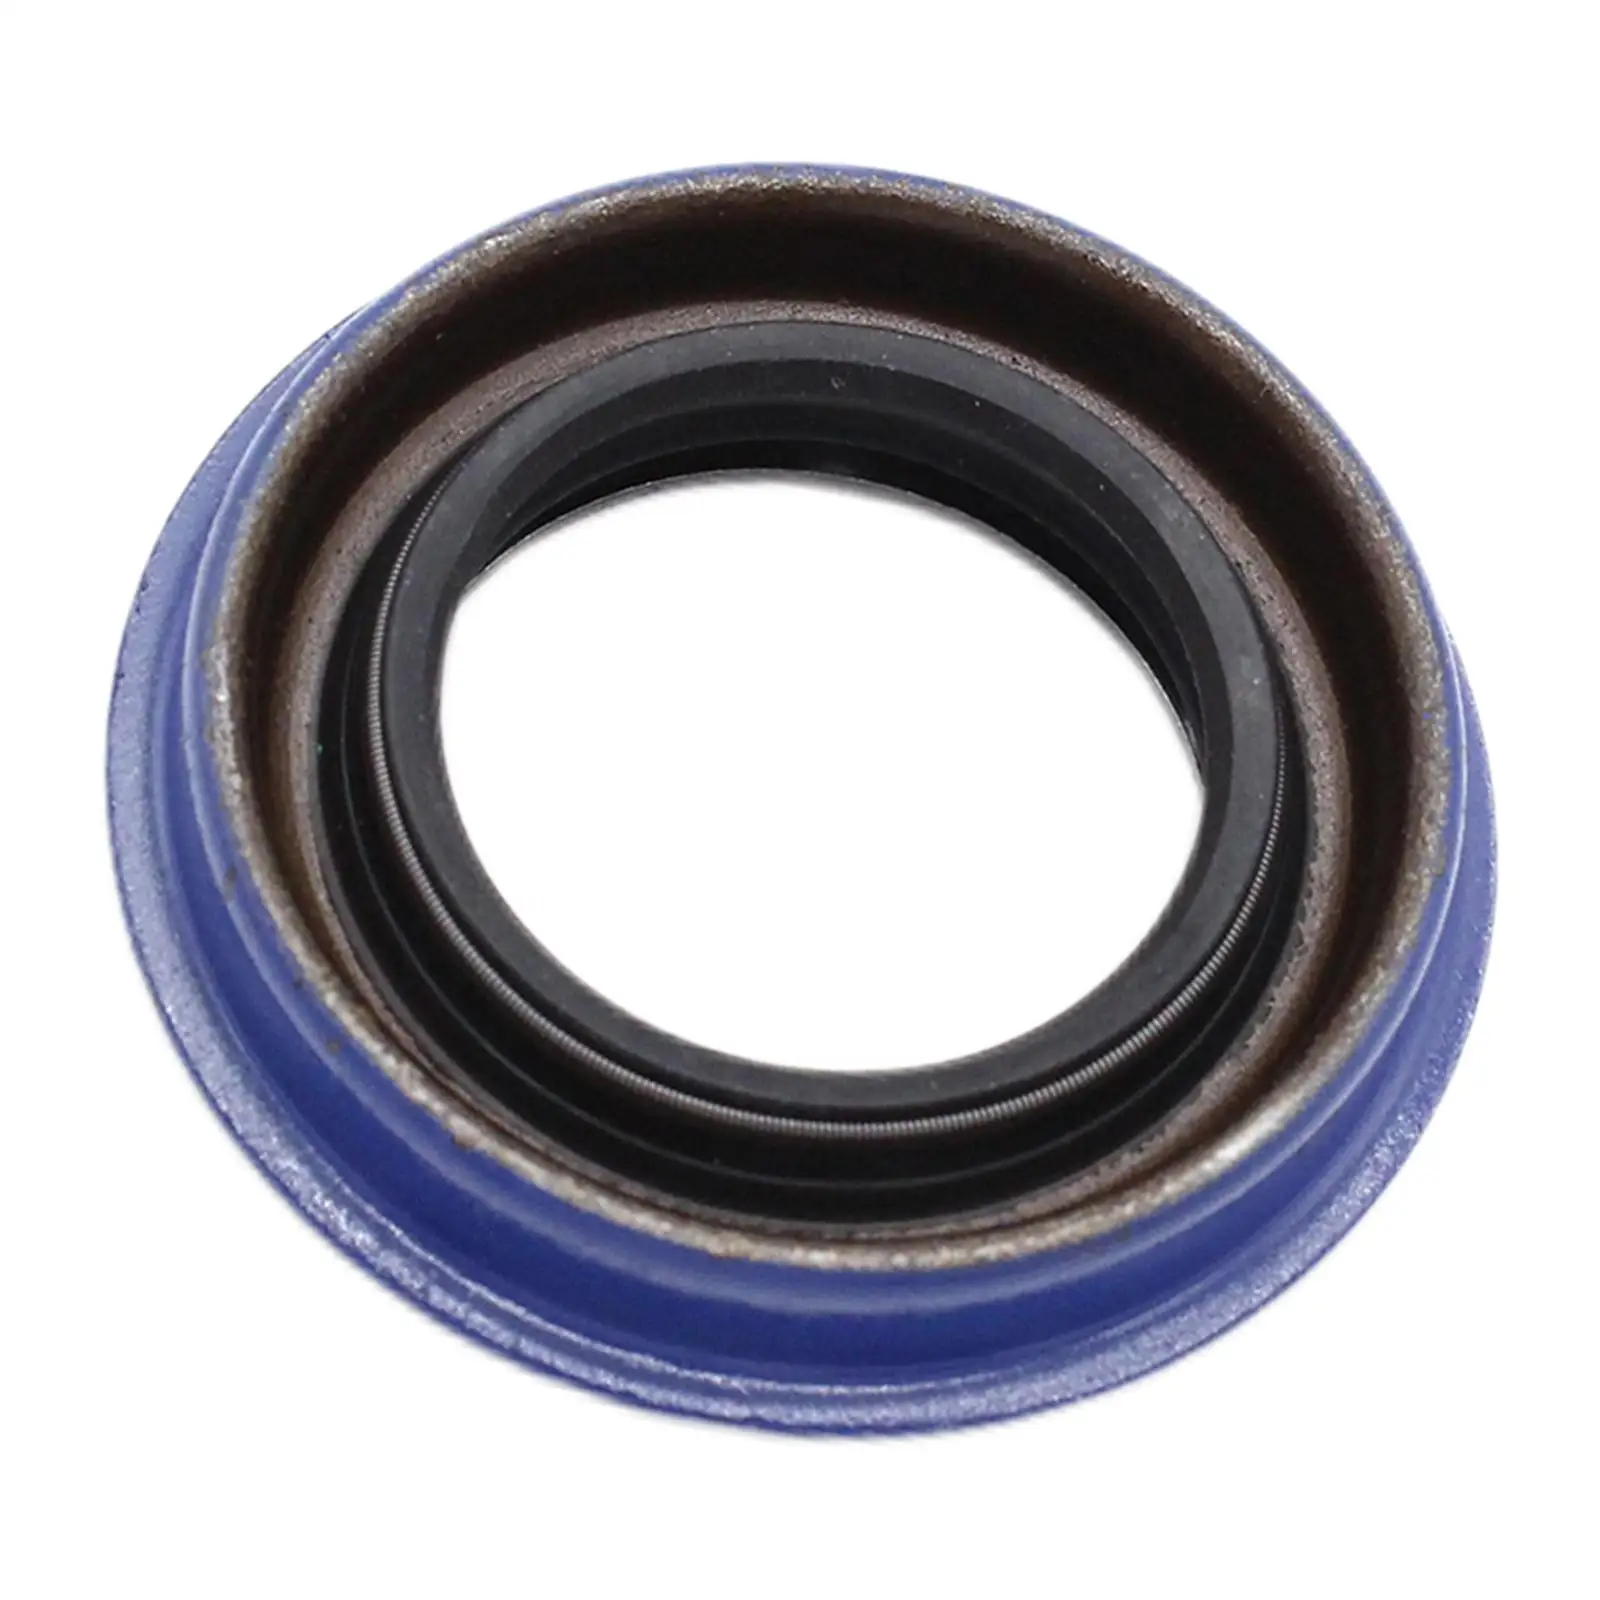 Drive Shaft Oil Seal, 12755013 Replace Engine Axle Shaft Seal for Vauxhall for Opel Sintra Cascada Insignia F40